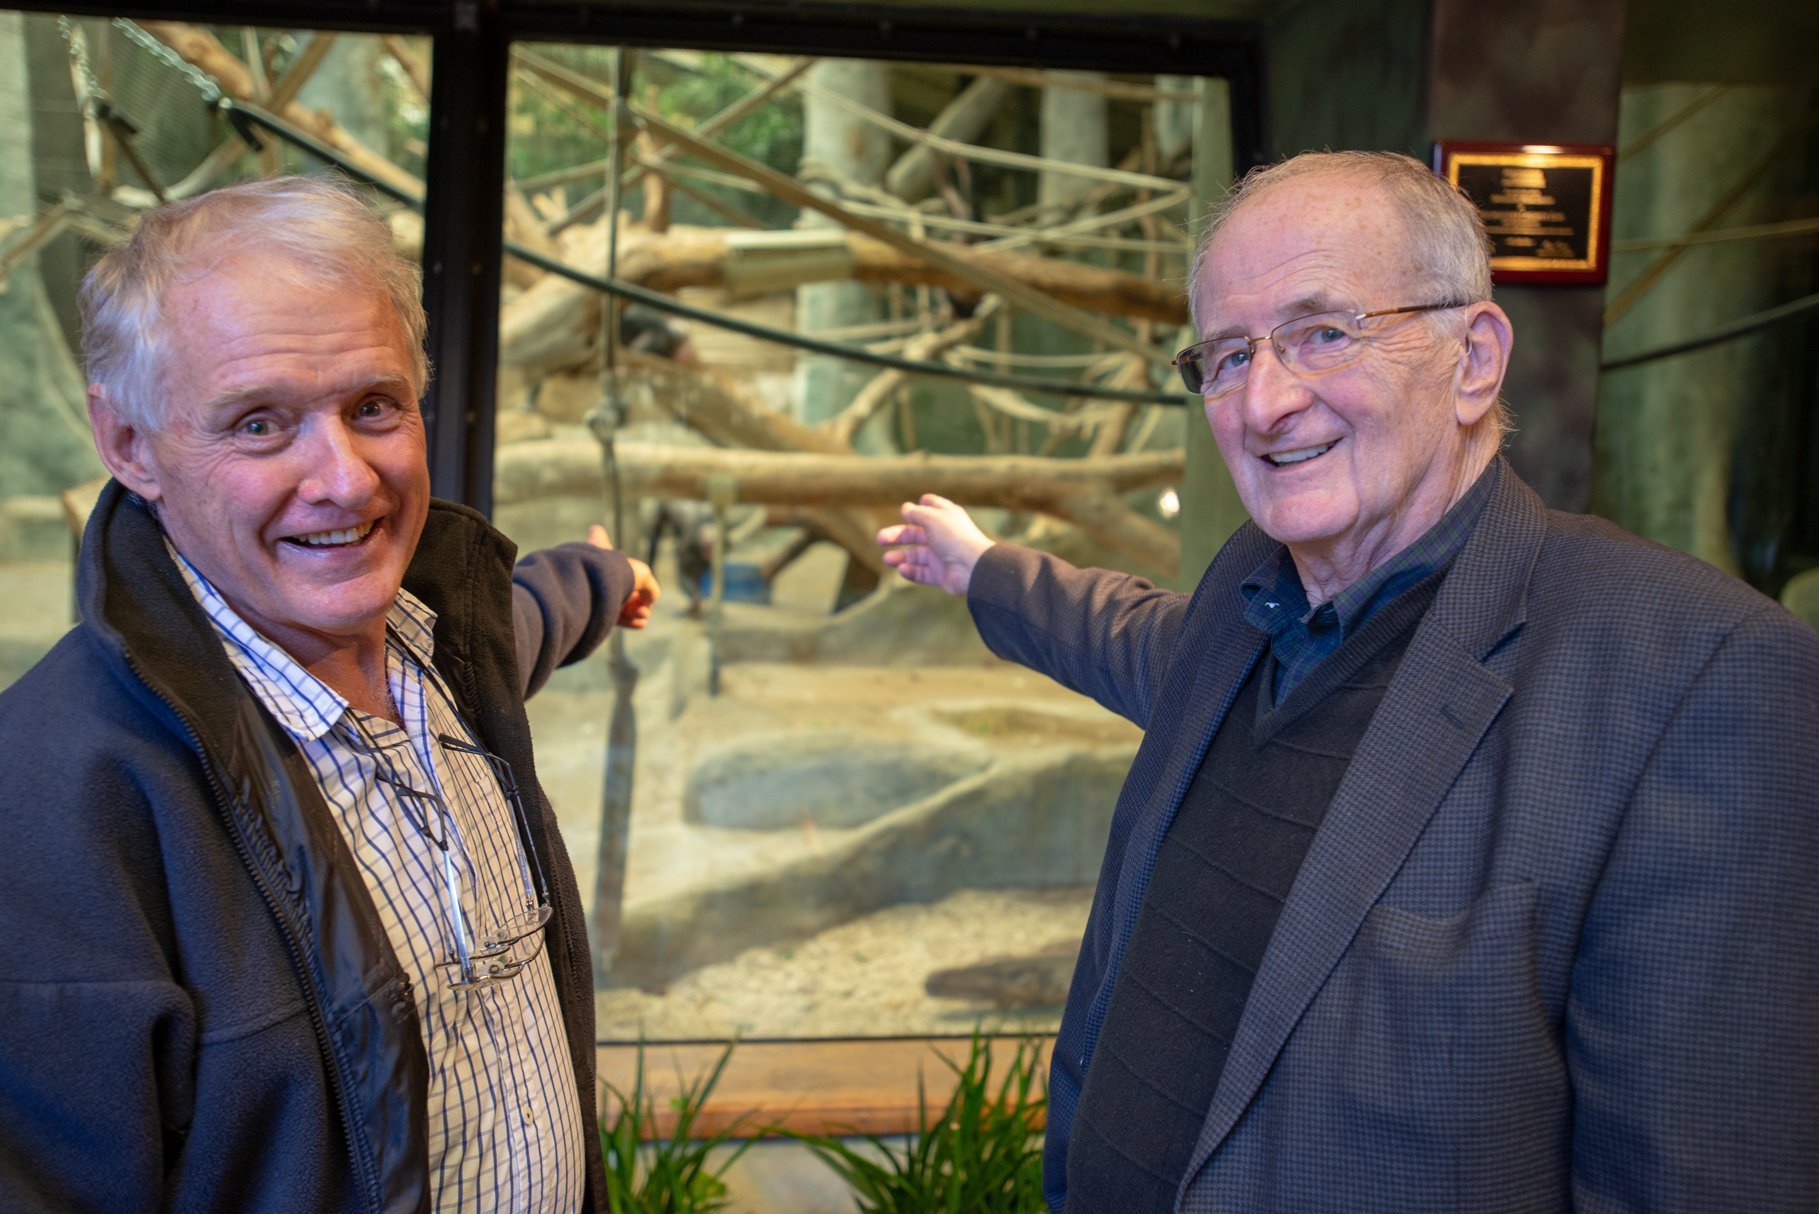 Jeremy Griffith and Professor Prosen in front of the Bonobo enclosure at the Milwaukee County Zoo